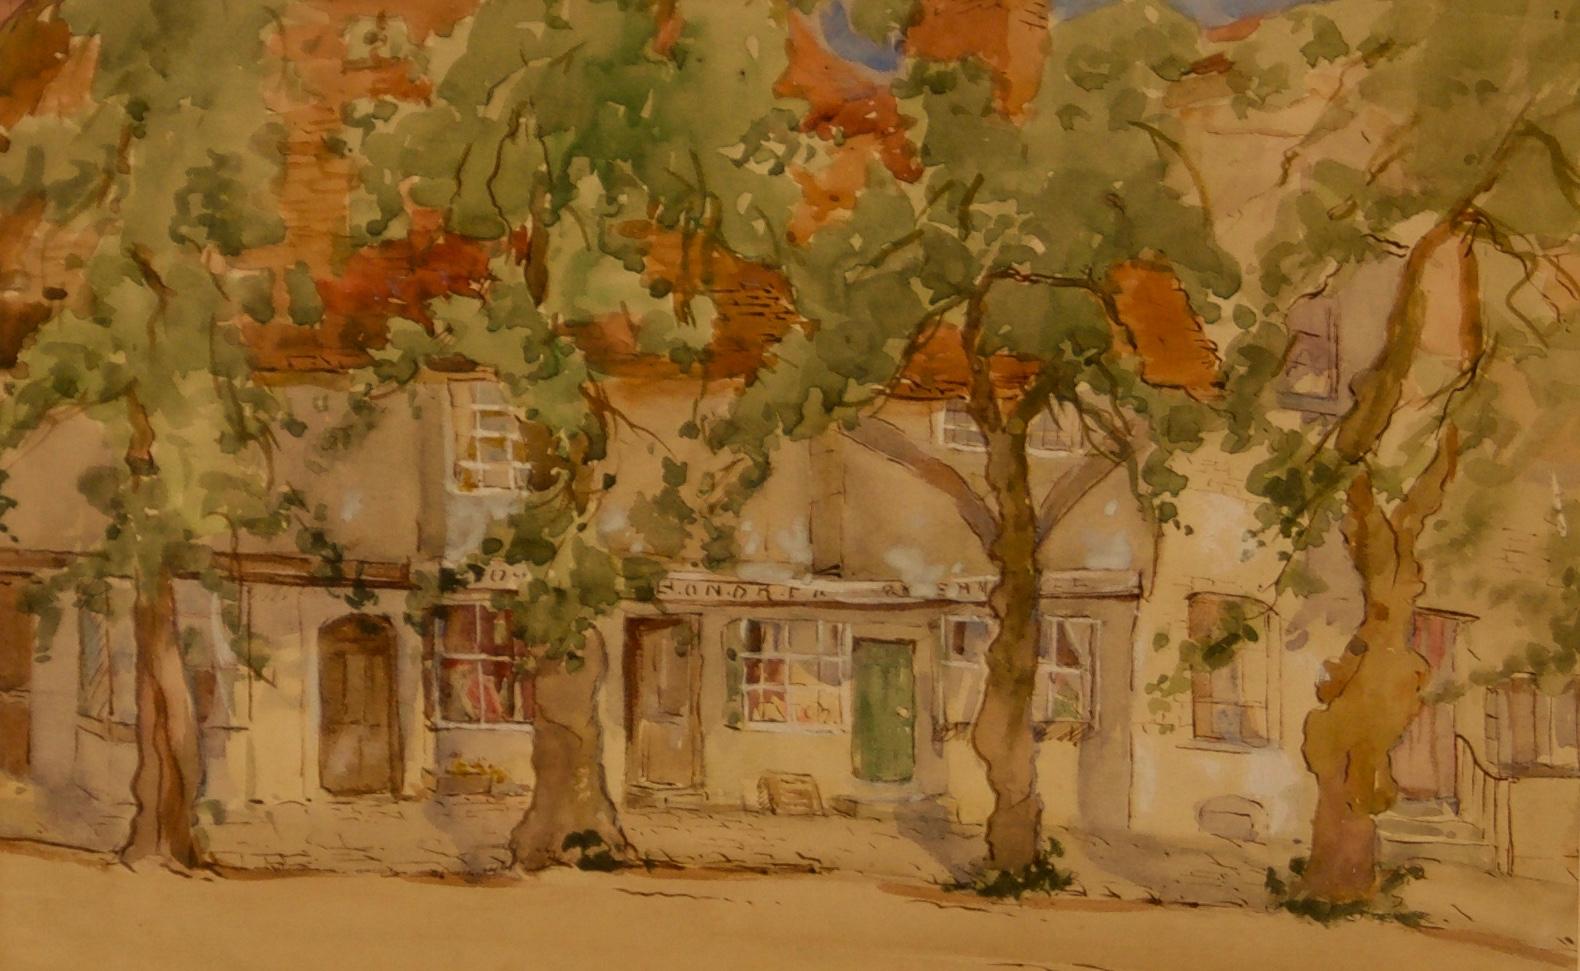 Sterndale Bennett Landscape Art - South of France - Early 20th Century Impressionist Watercolour by Bennett